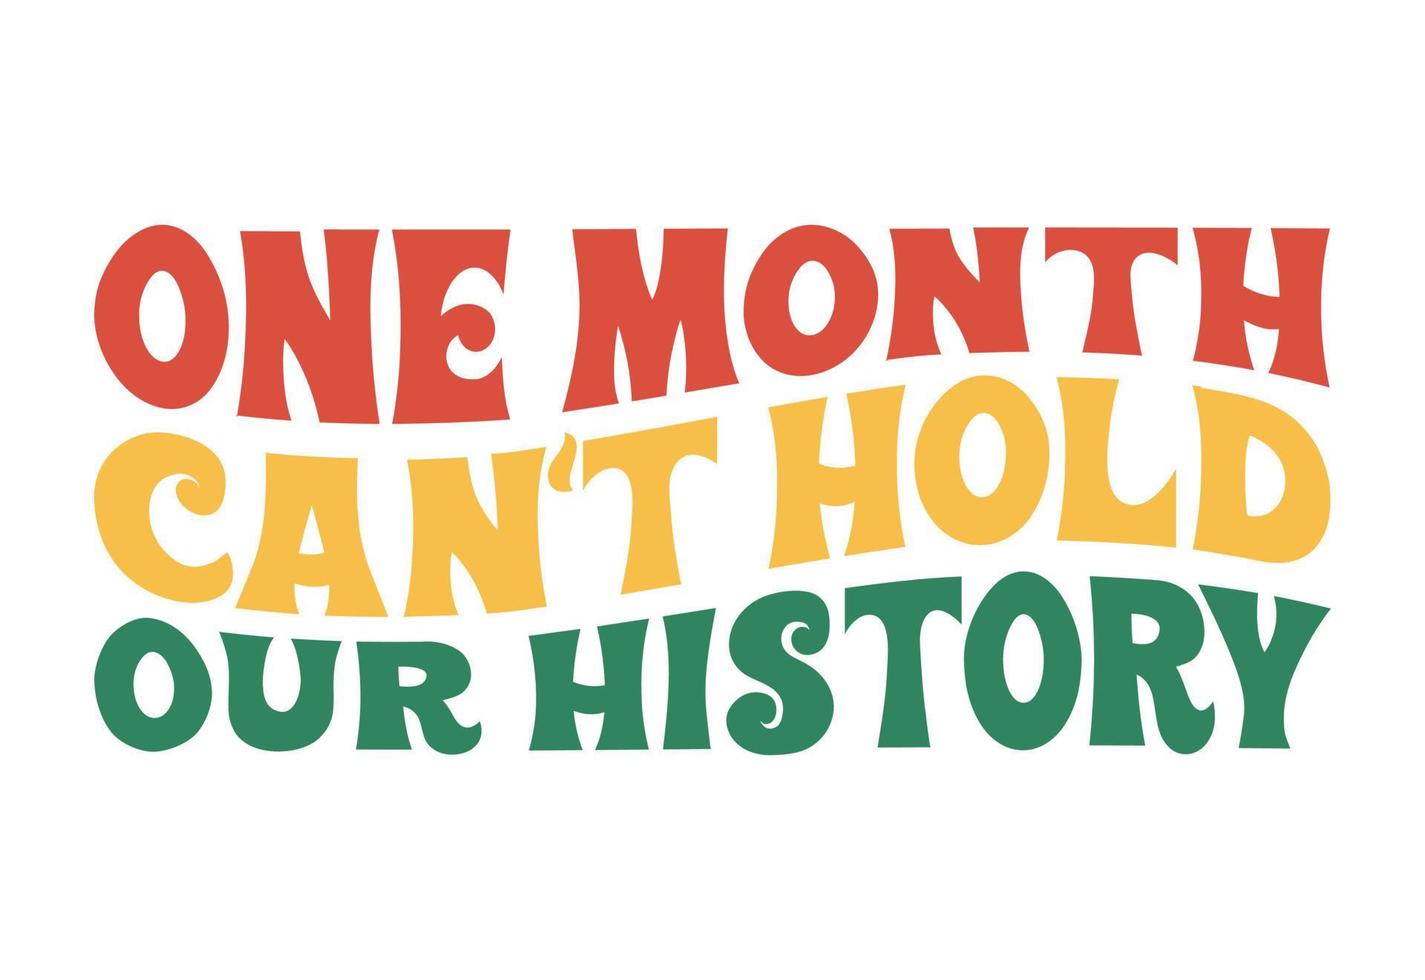 One Month Can't Hold Our History vector